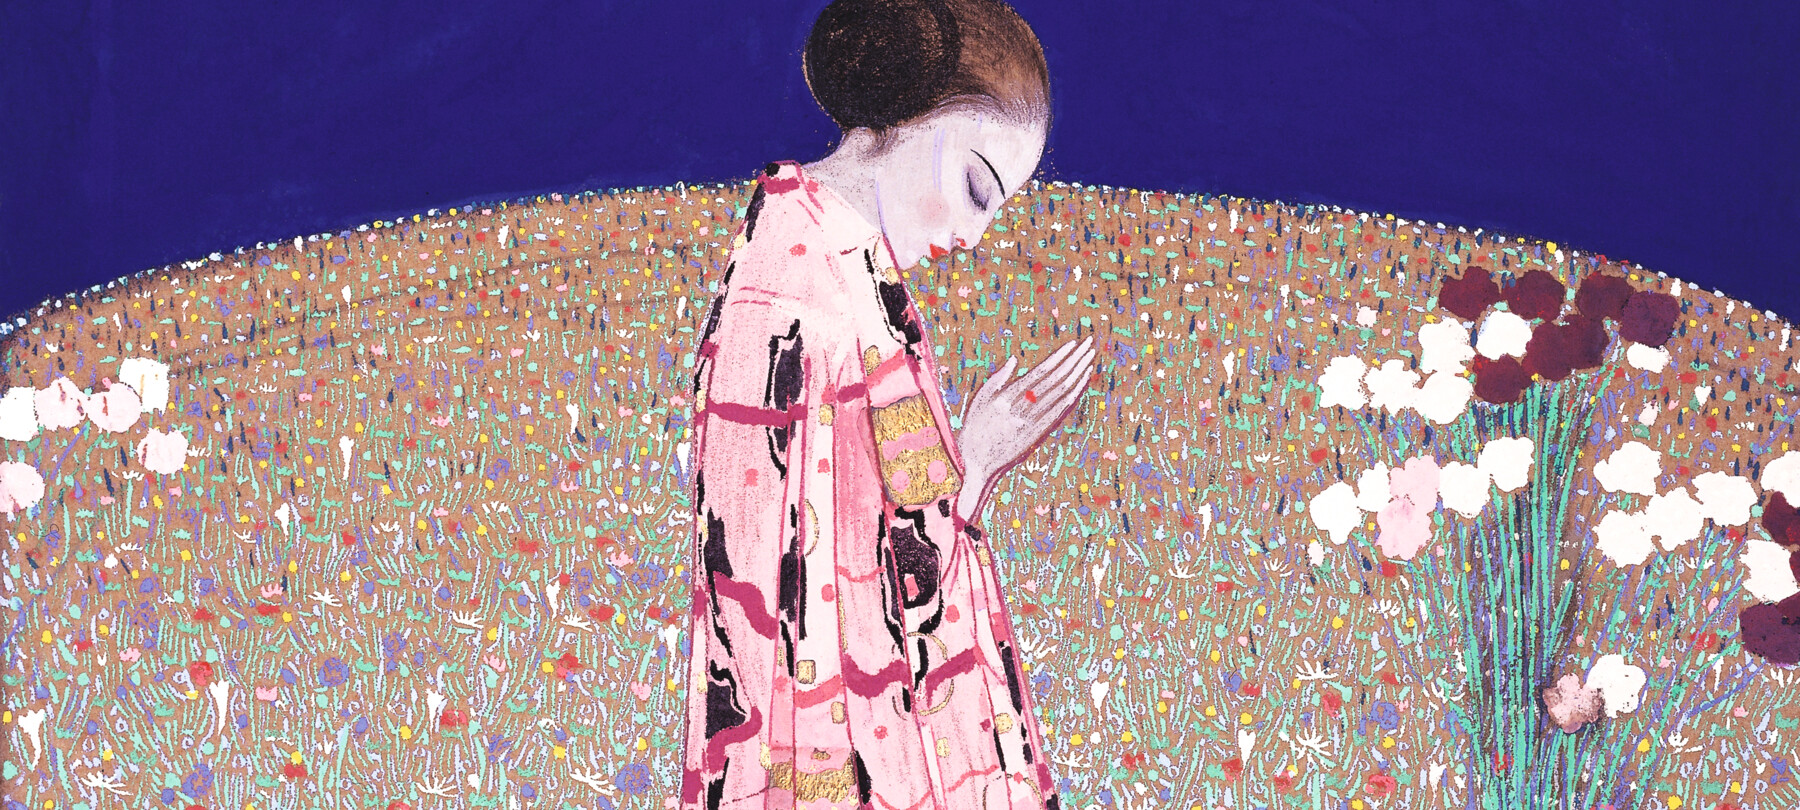 Klimt and Italian art: an exhibition at Mart in Rovereto